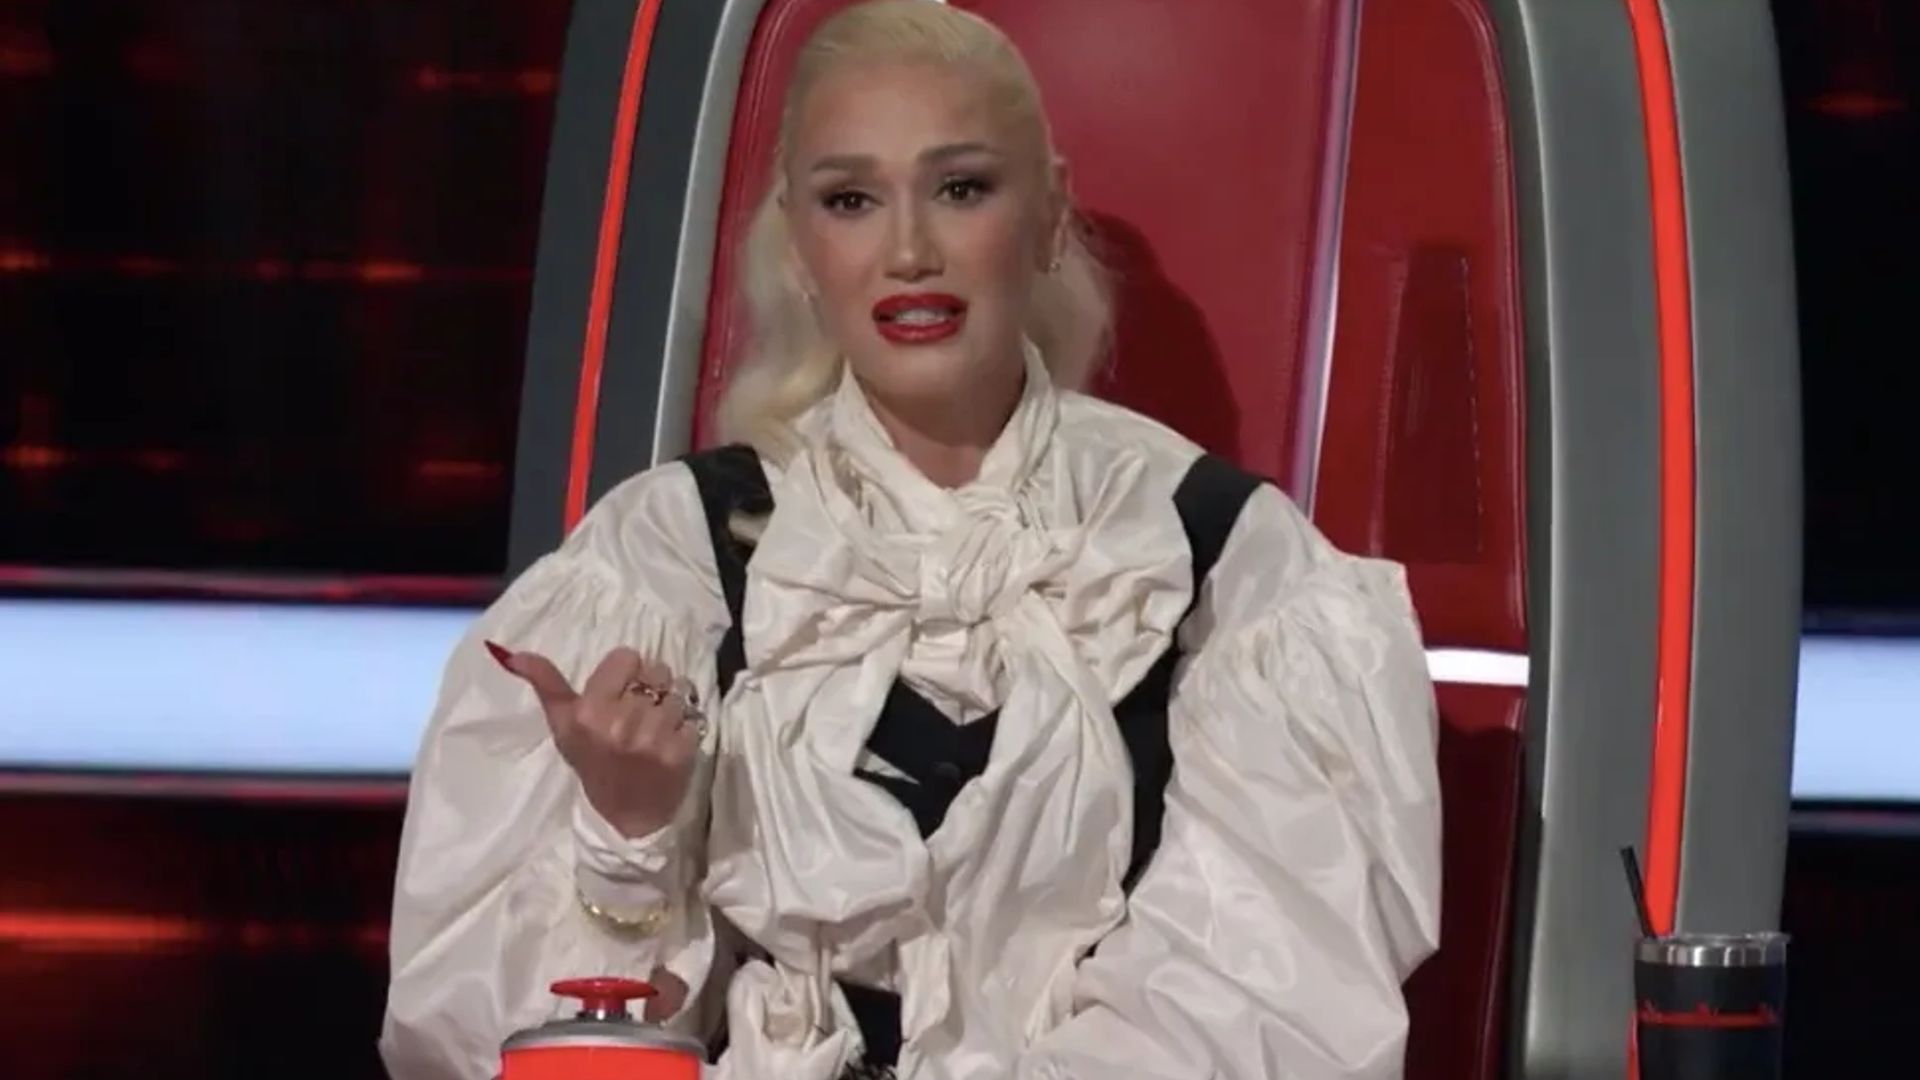 Gwen was mocked for her outfit choice